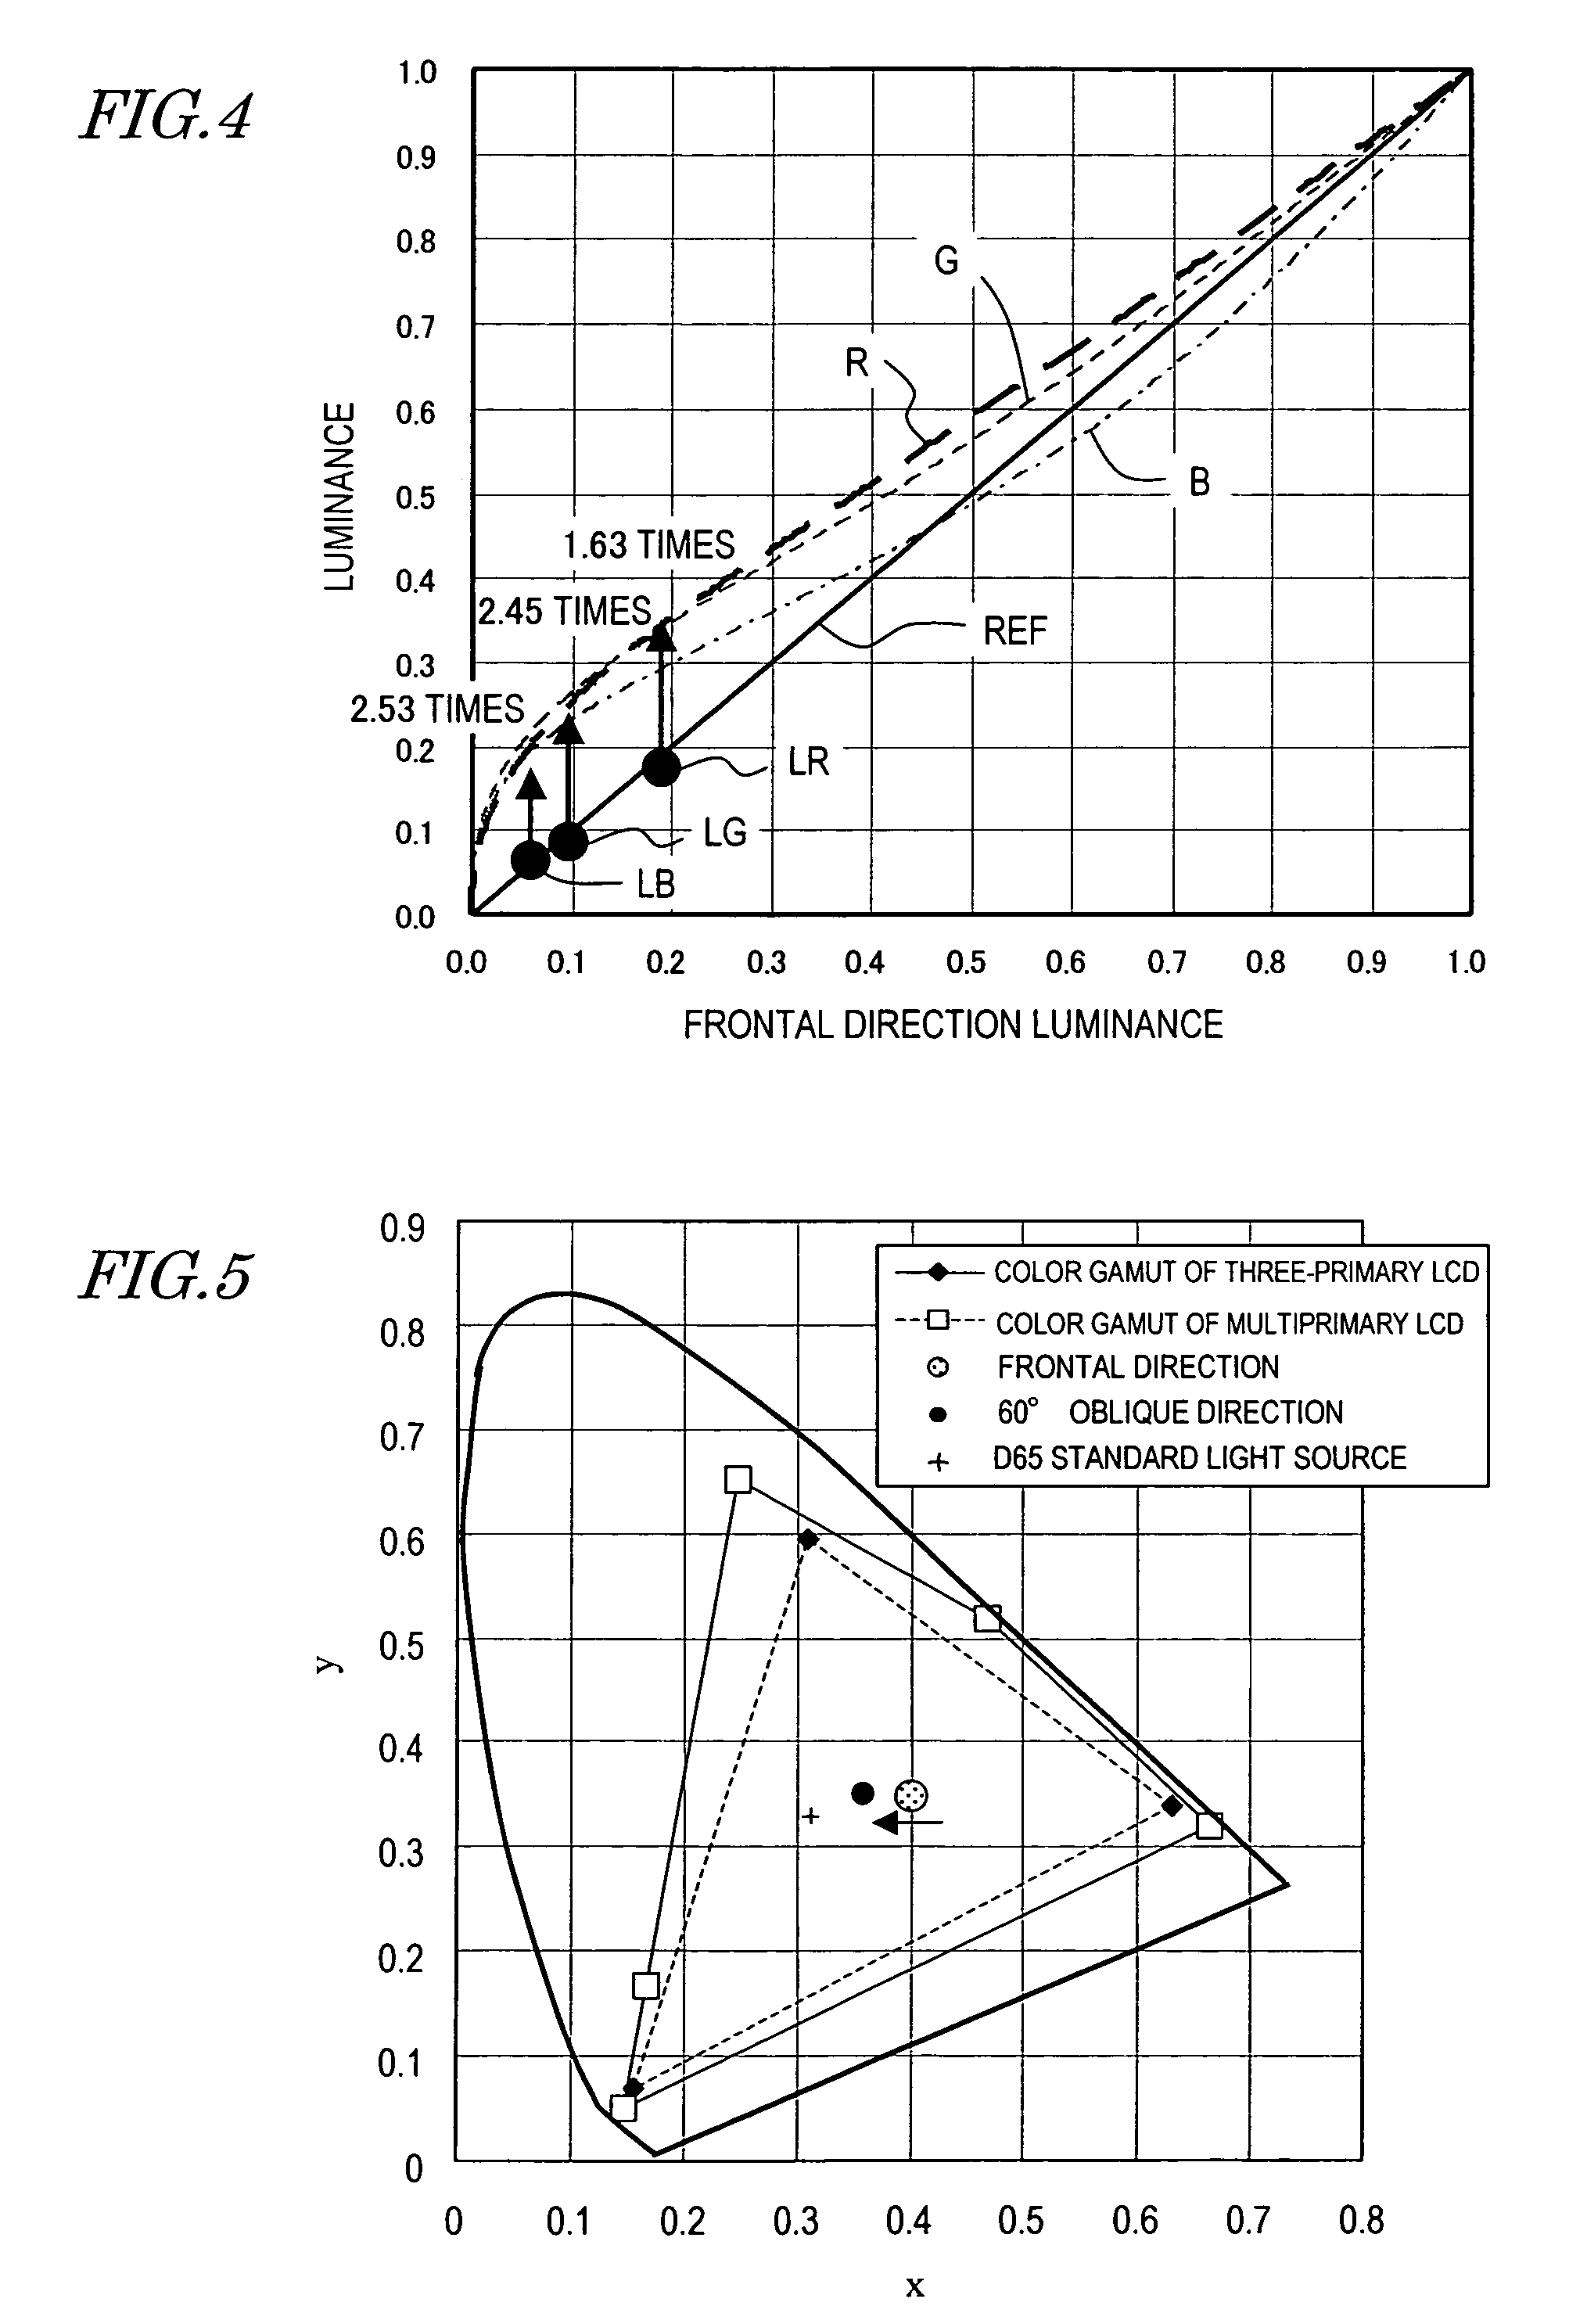 Signal conversion circuit and multiple primary color liquid crystal display device with the circuit